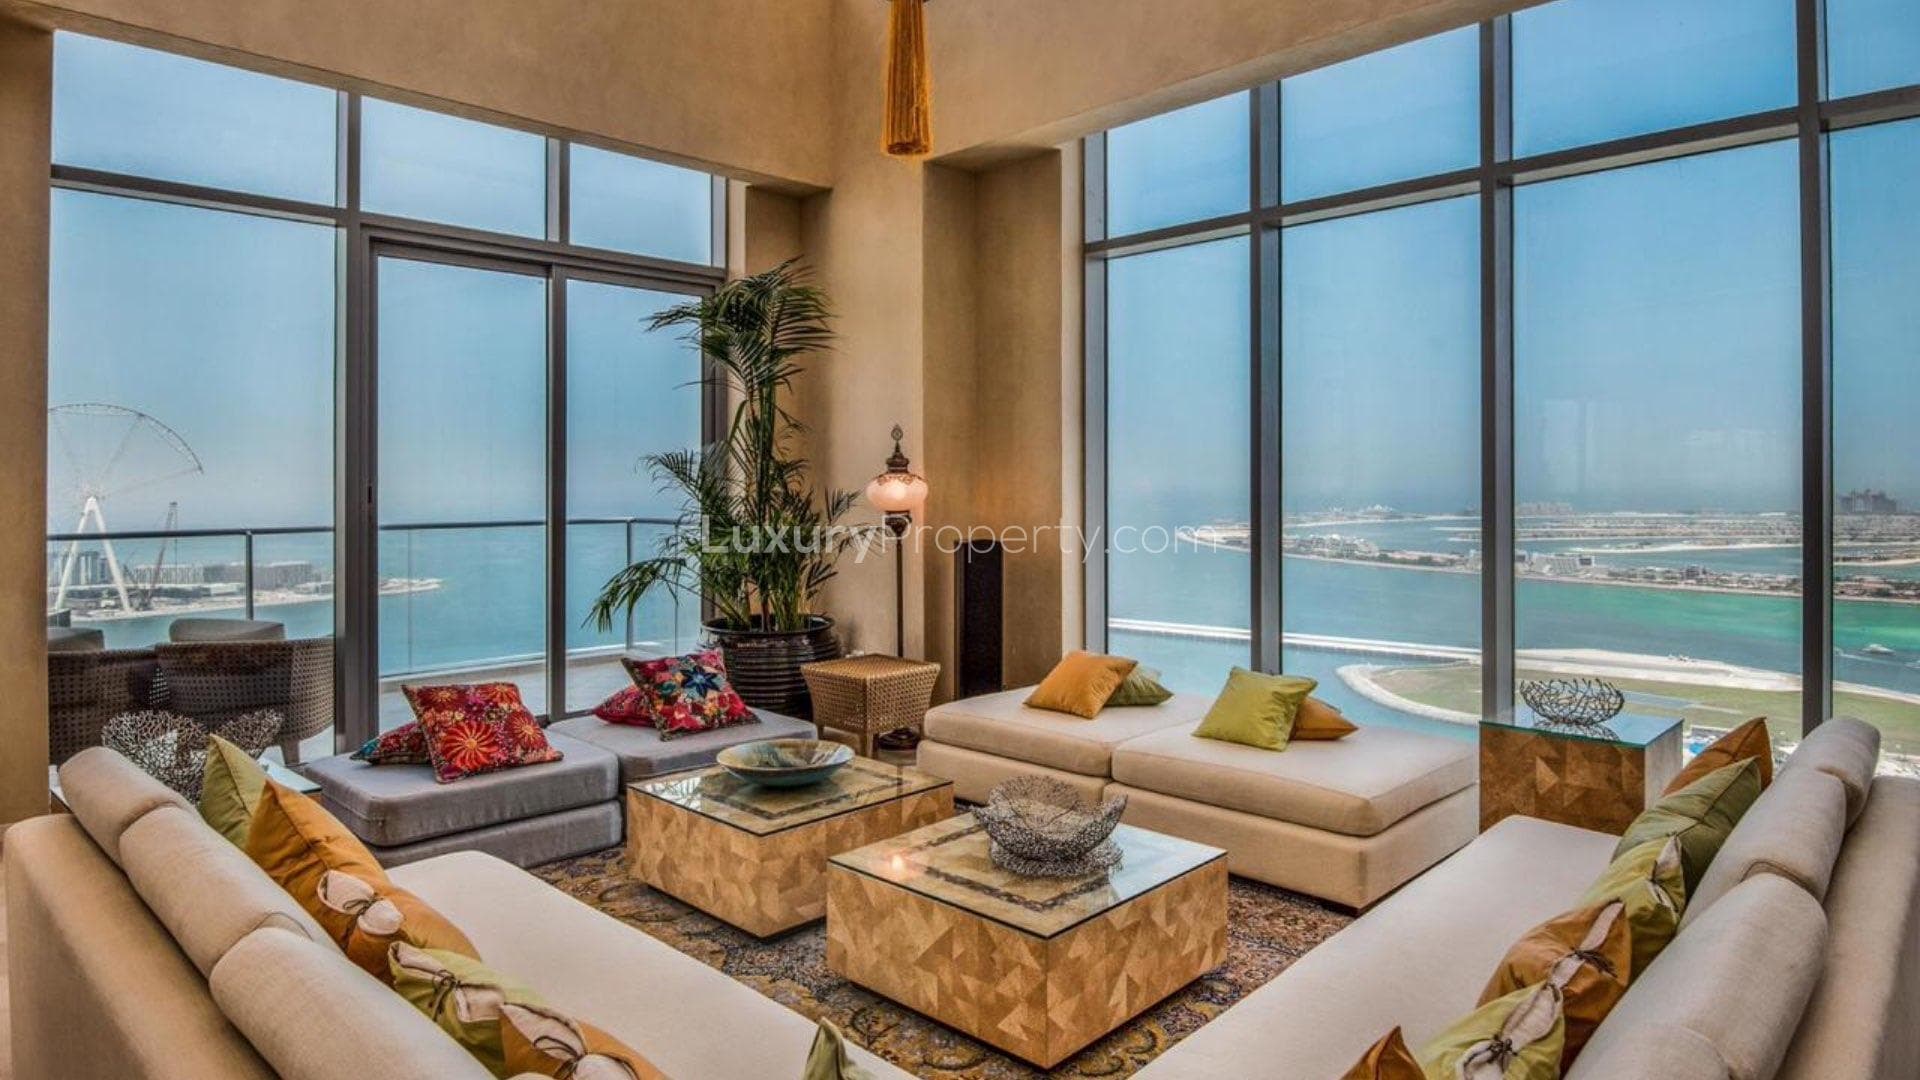 4 Bedroom Penthouse For Sale Trident Grand Residence Lp17461 2aa5759dabe80000.jpg